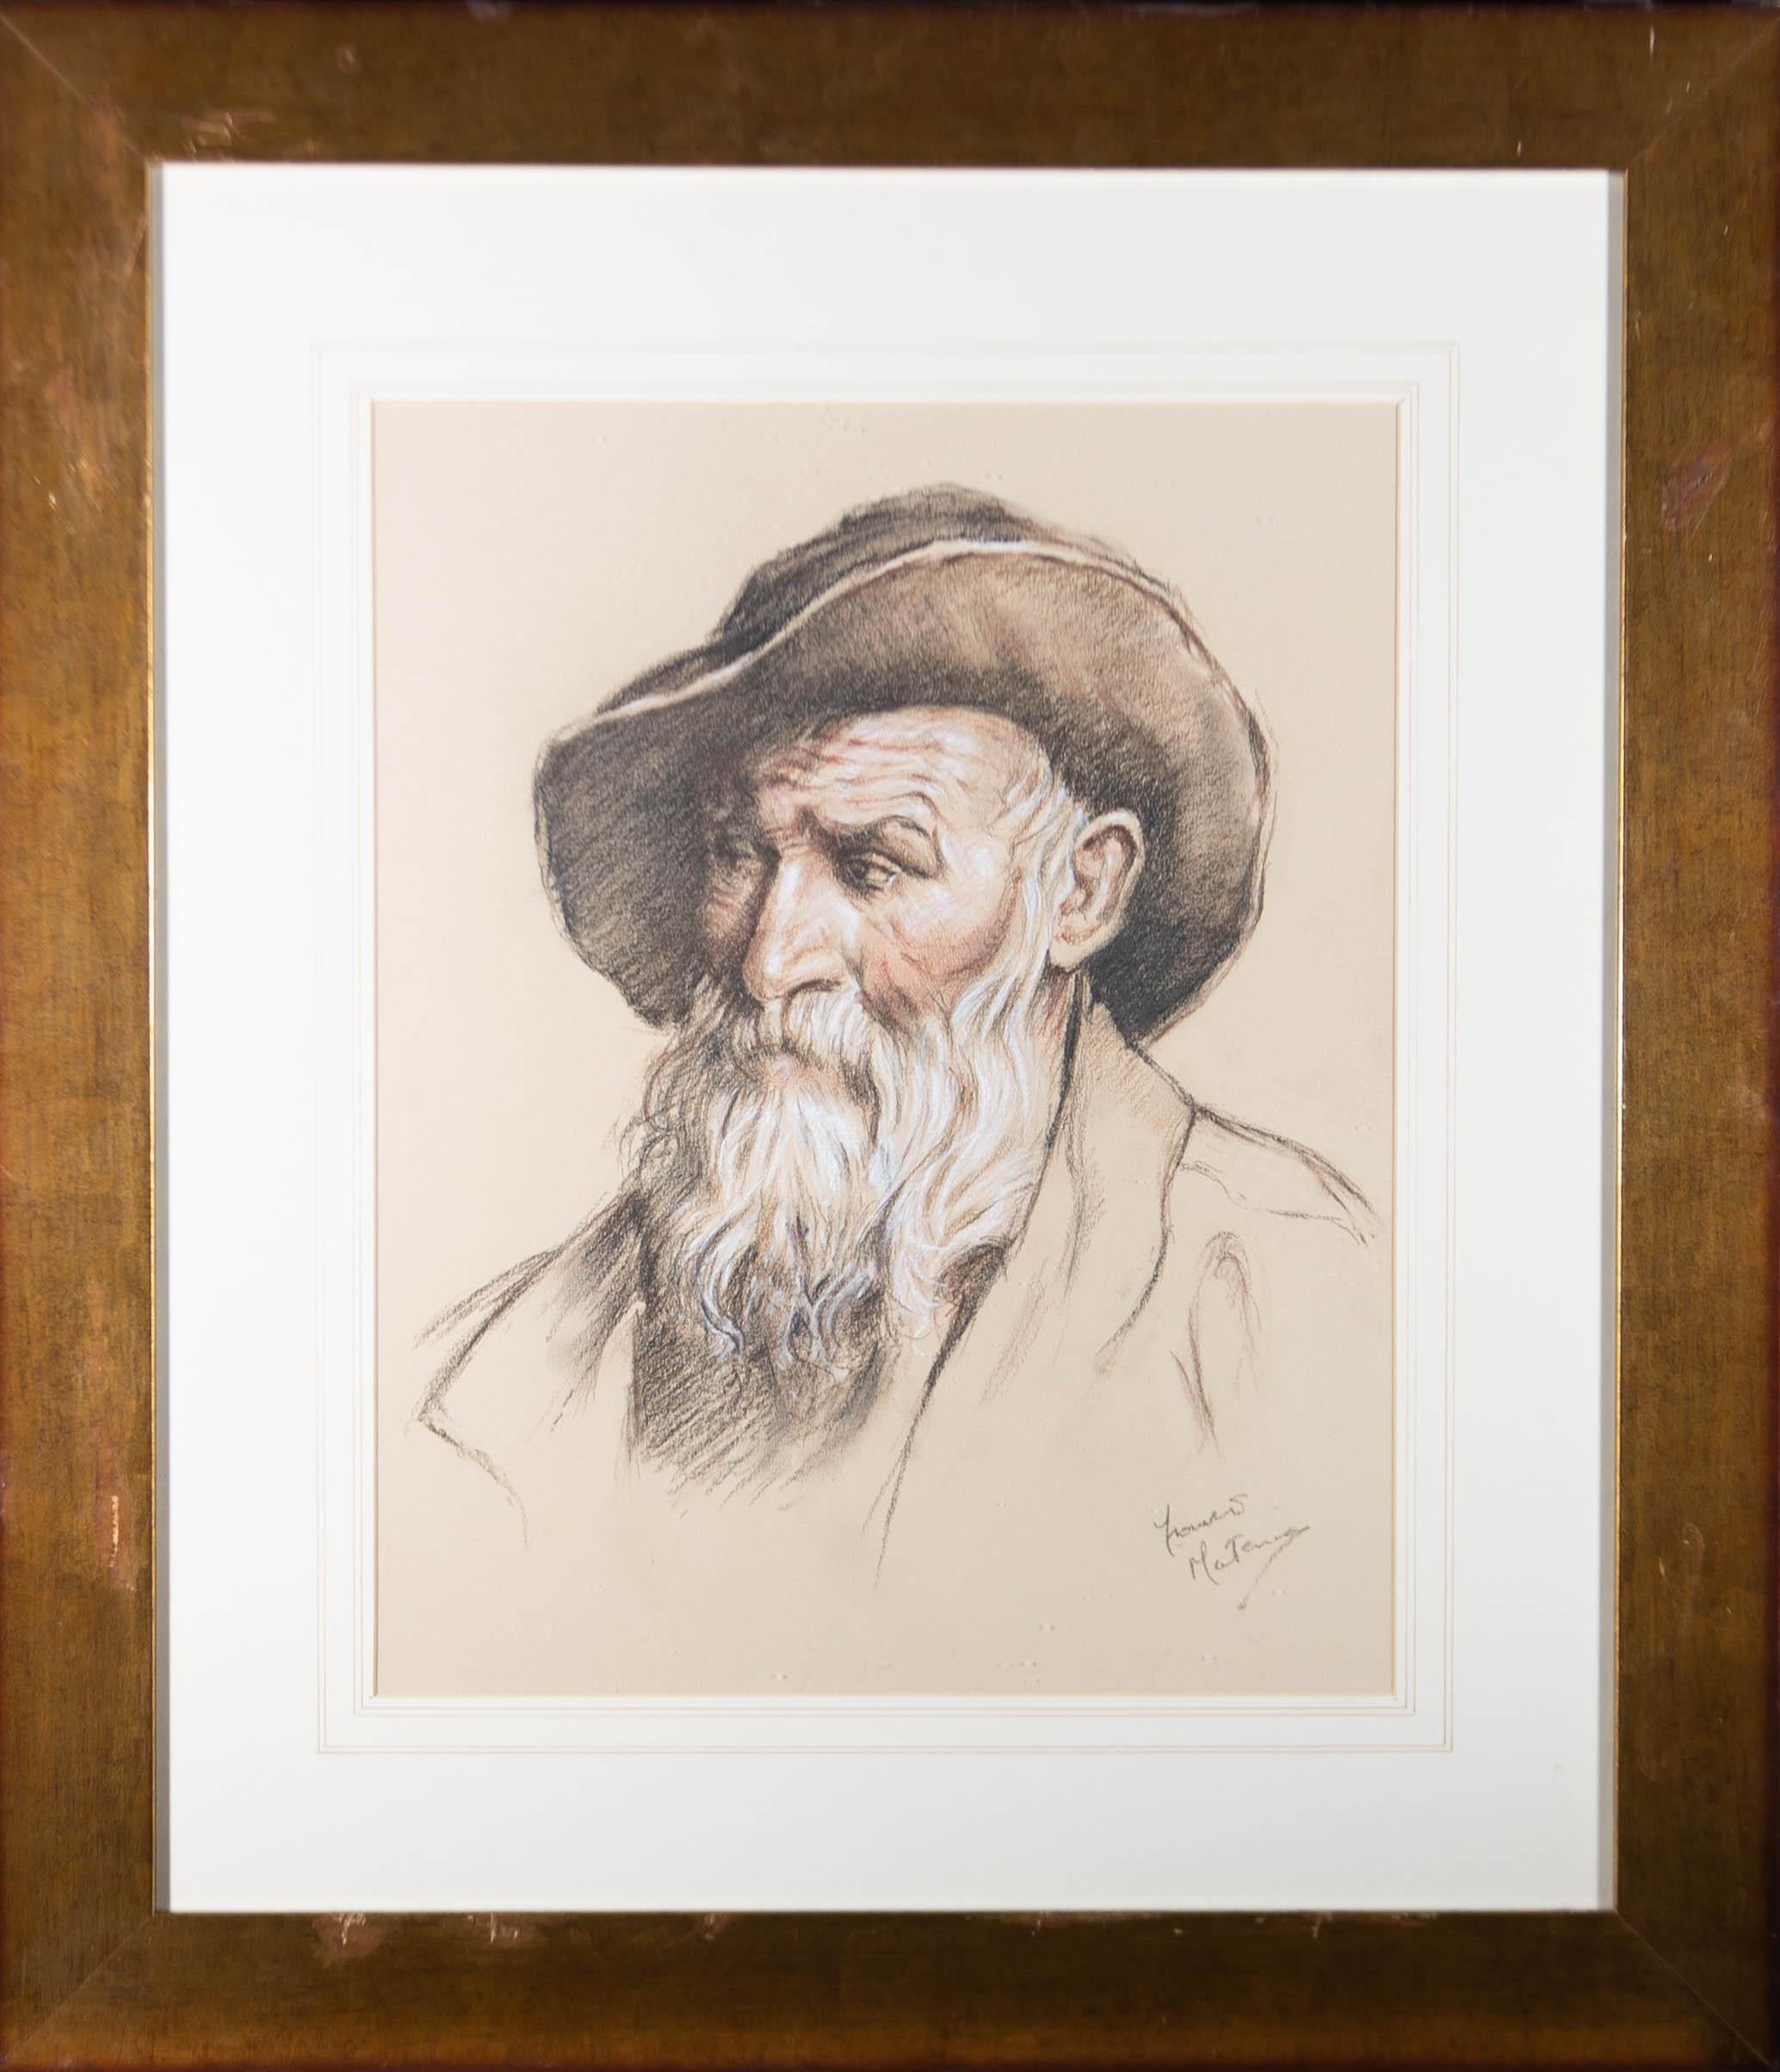 Layers of whispy chalk lines build up a compelling portrait of a bearded man in a hat. The artwork Captures the scored nature of the weathered subject's face and is signed in the lower right. Well presented in a gilded wood frame with a washline